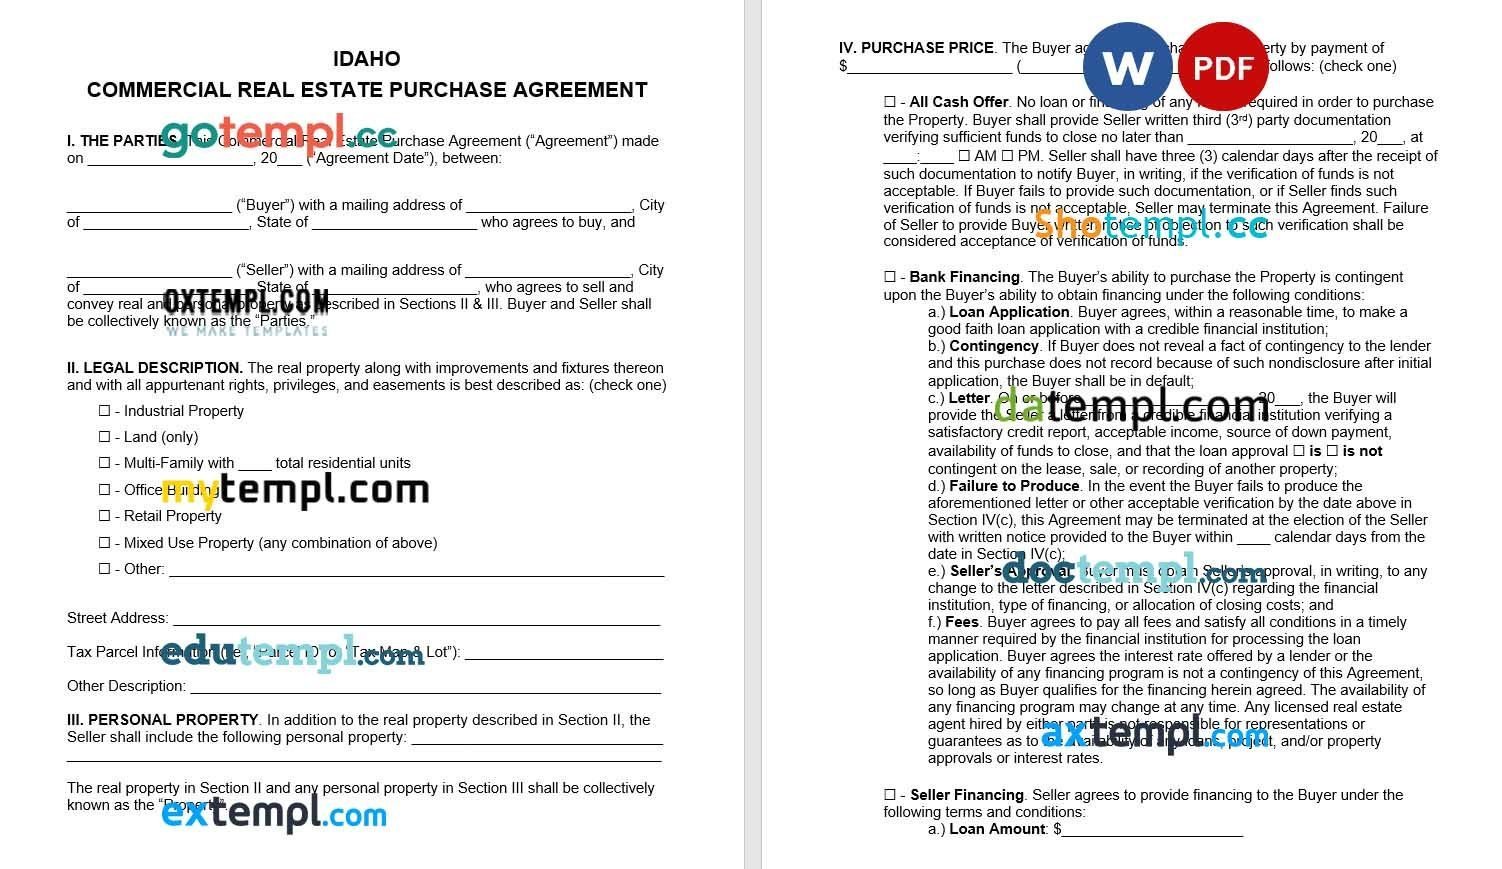 Idaho Commercial Real Estate Purchase Agreement Word example, fully editable